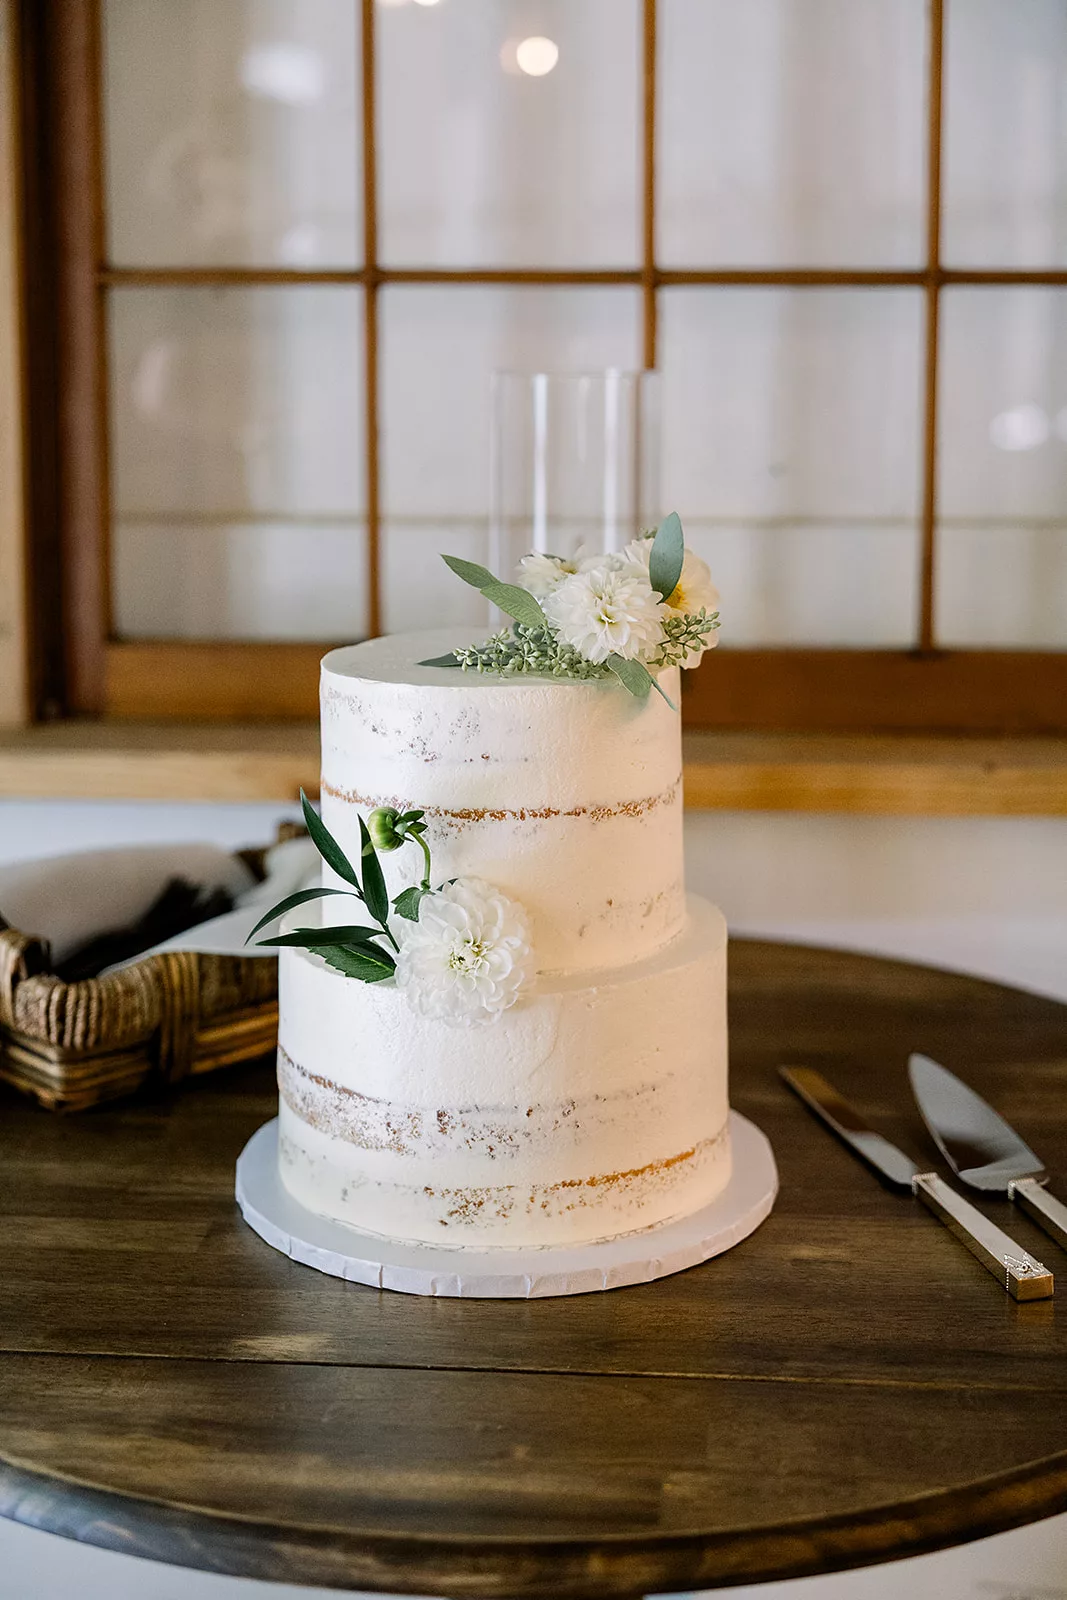 Details of a white two tier cake sitting on a wooden table